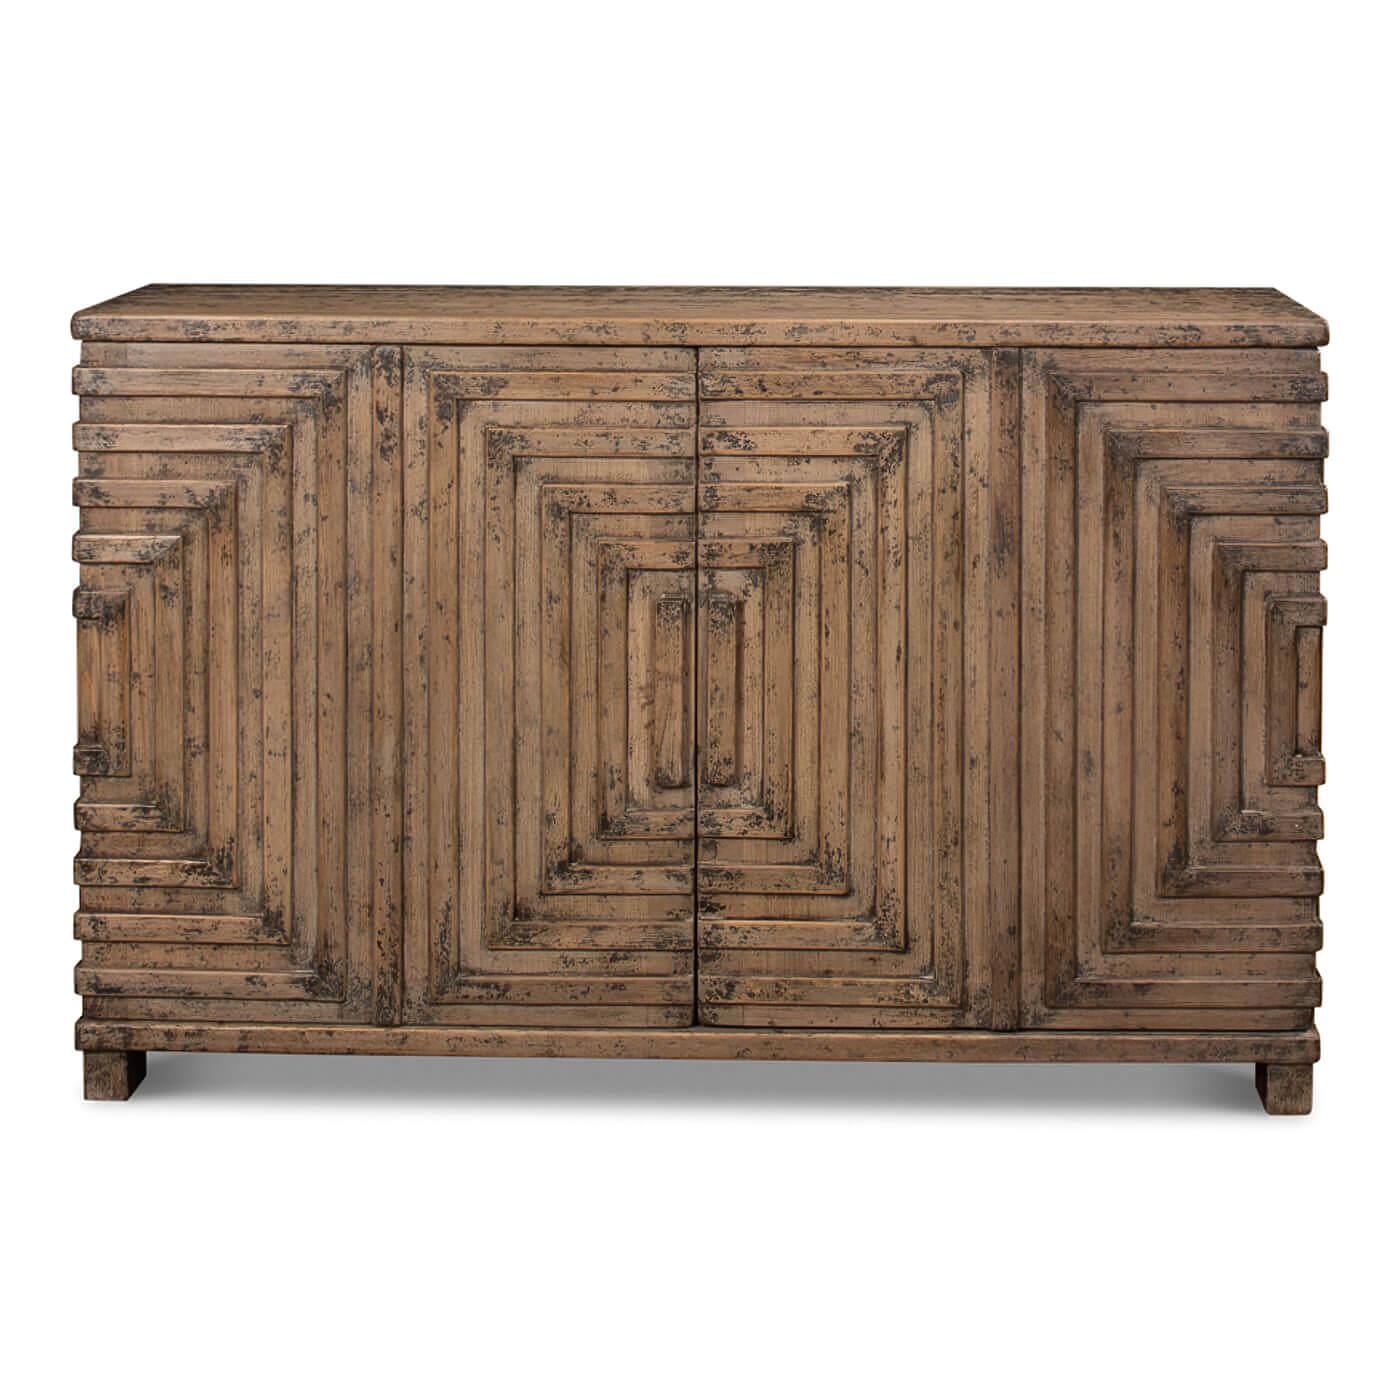 A modern geometric two-door cabinet. This piece features a wide linear geometric design on the doors. The antiqued and weathered driftwood finish highlights the unique design features of this piece. 

This cabinet is crafted in pine and it has one